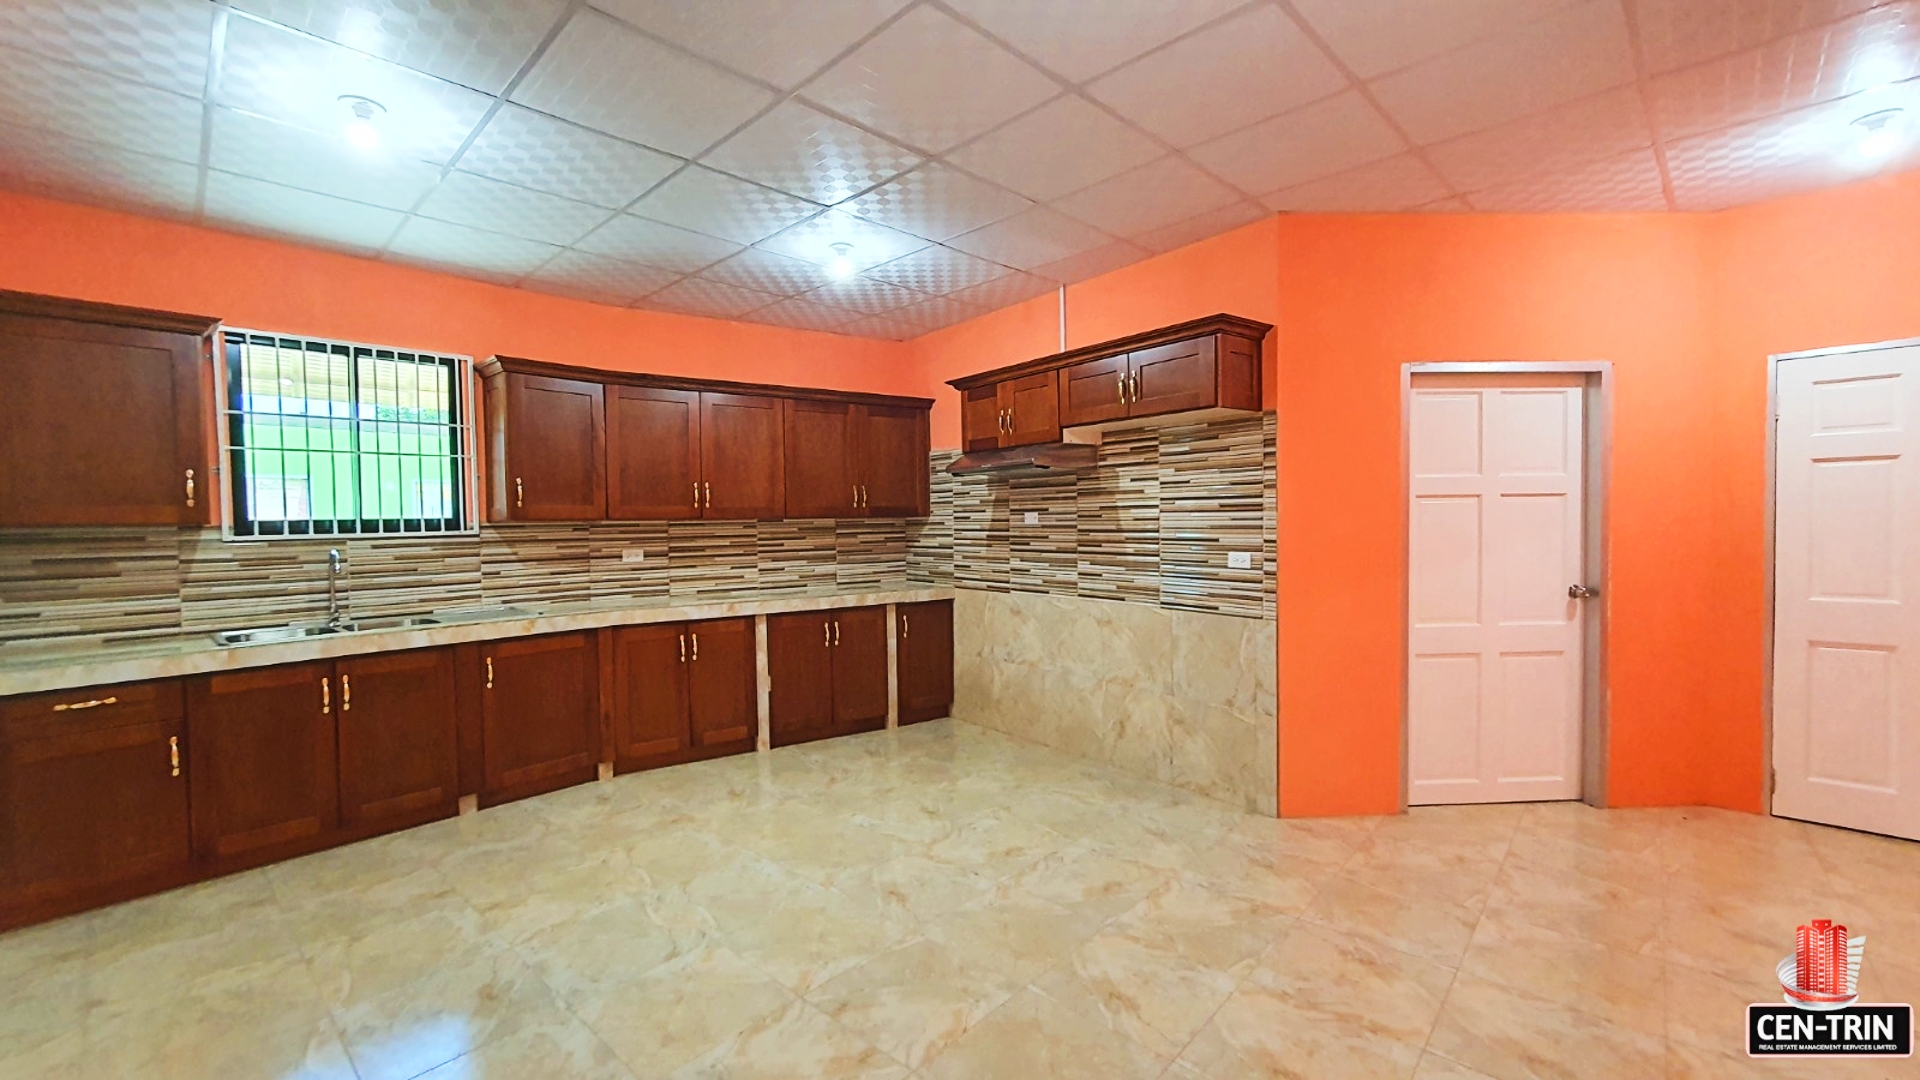 Kitchen with stainless steel sink and faucet, wooden cabinets, and orange walls in this 2-Bedroom Apartment for Rent